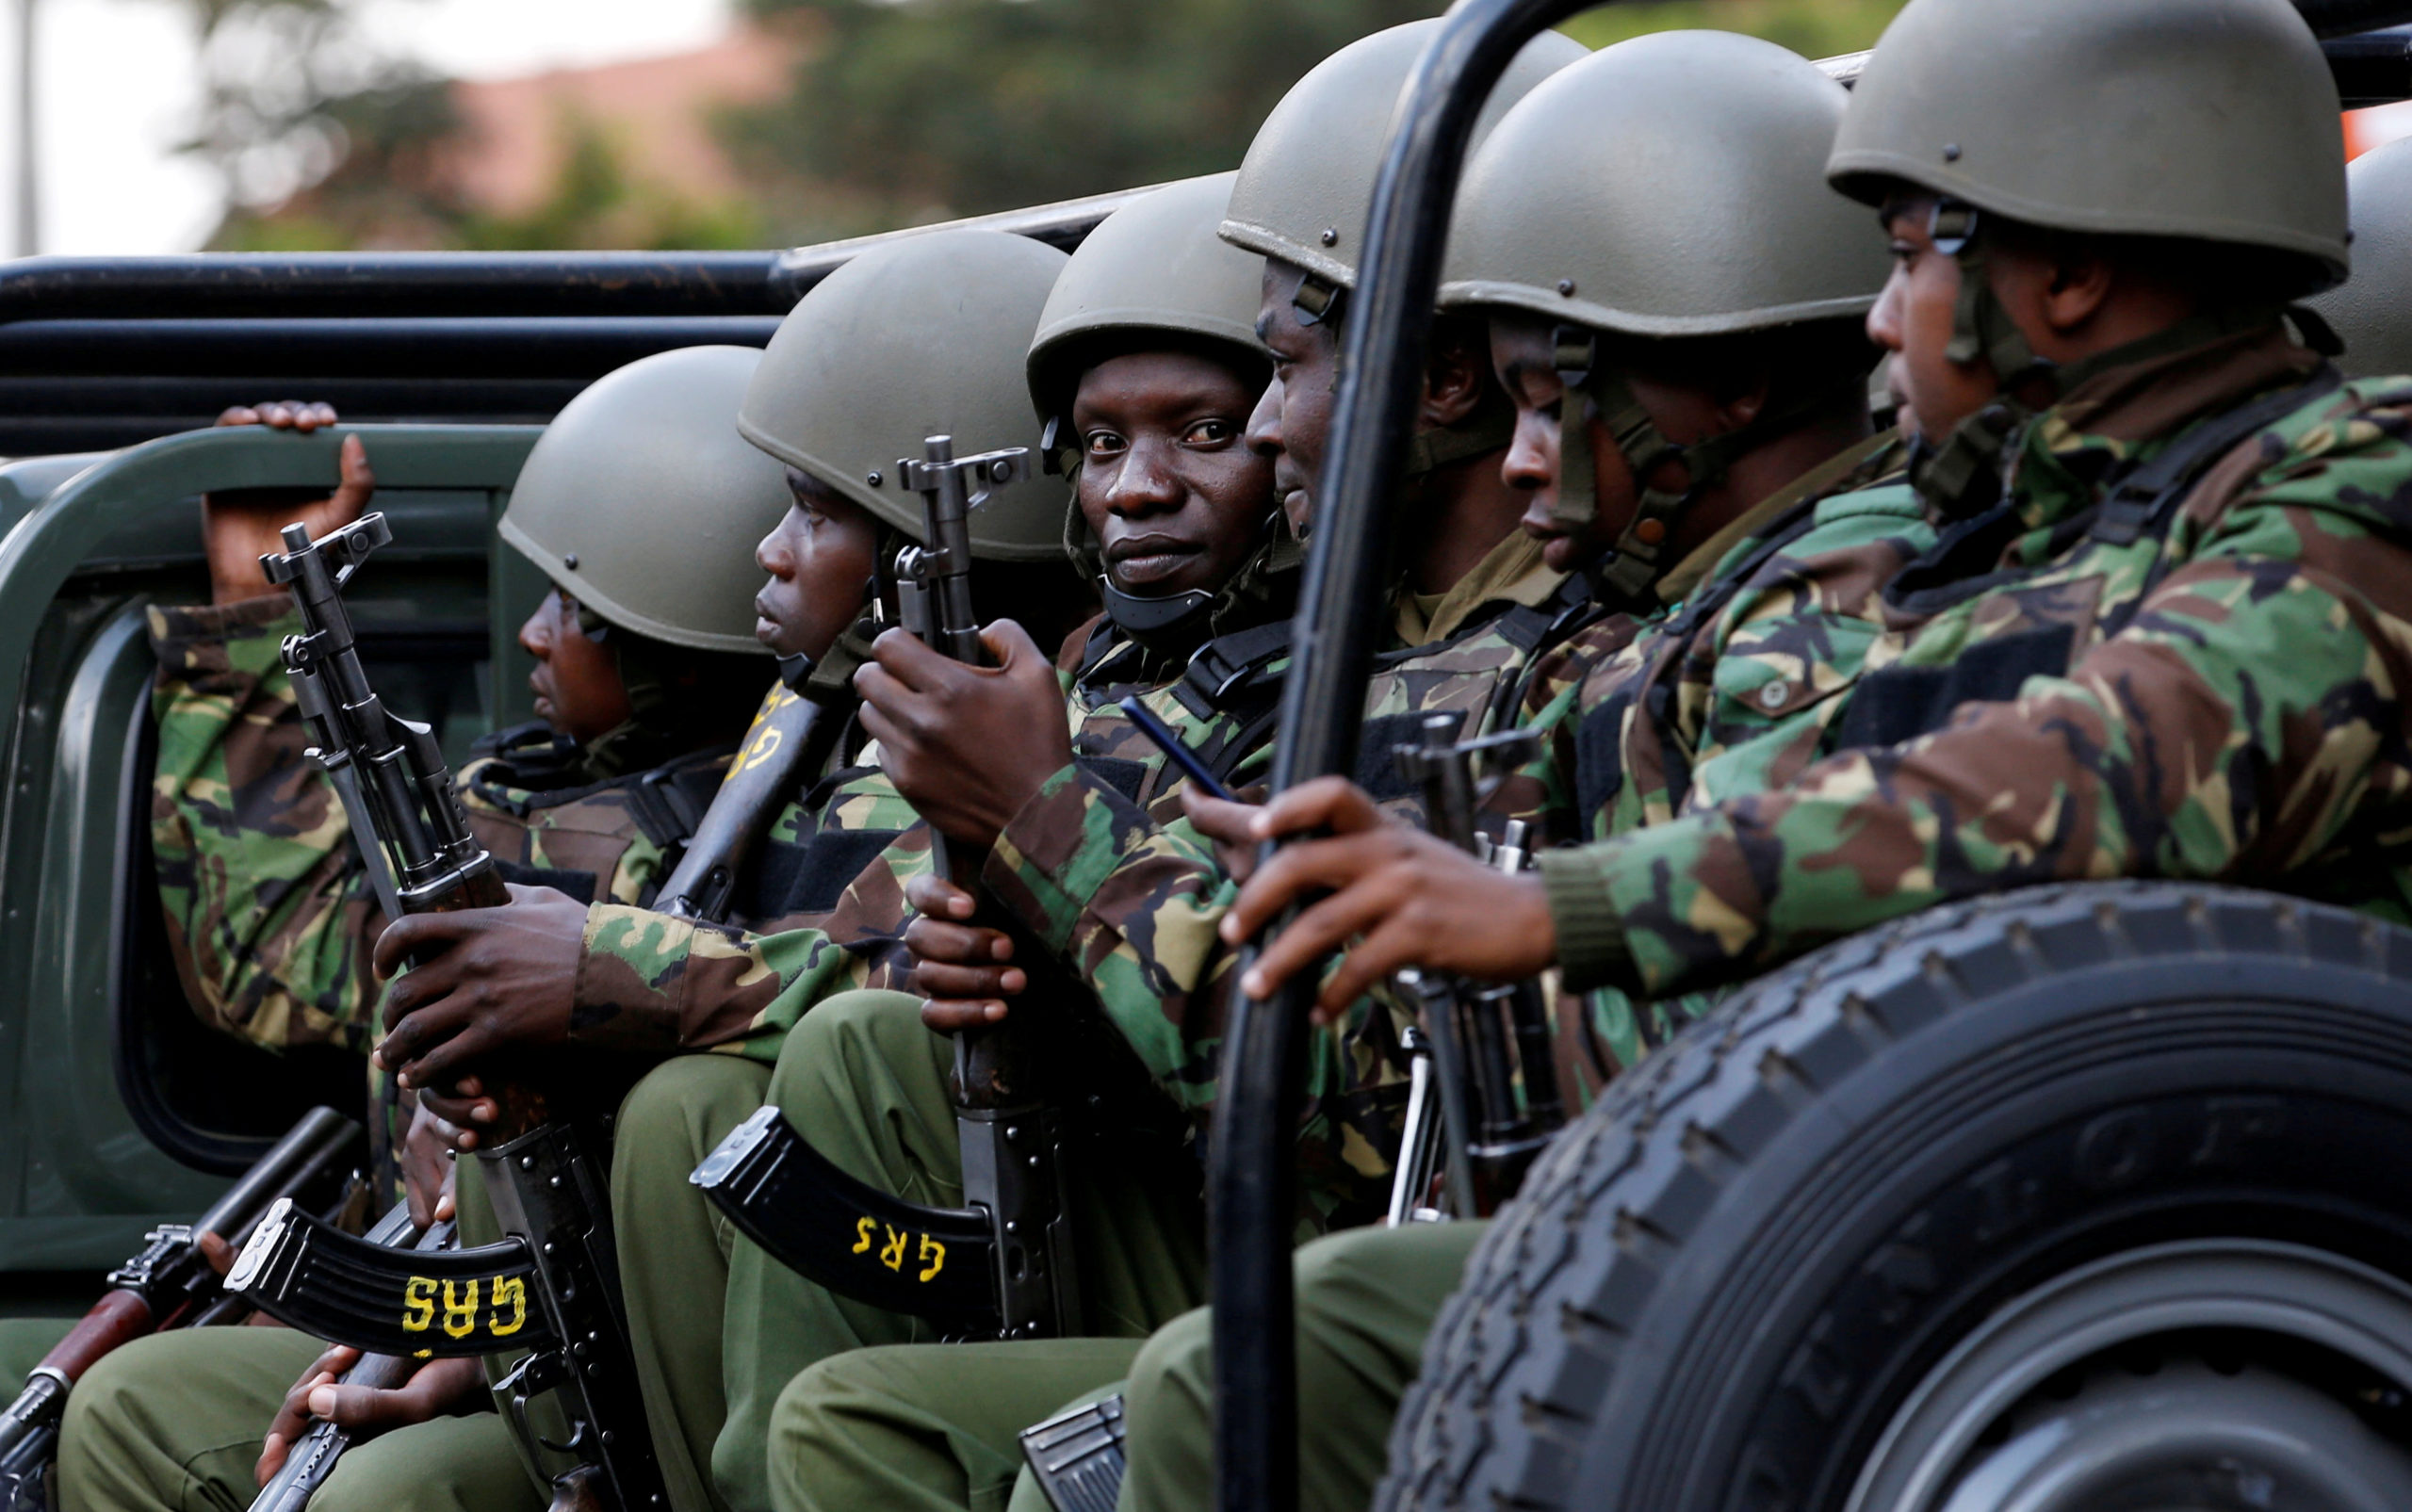 Kenya Moves To Ban Romance Between Police Officers